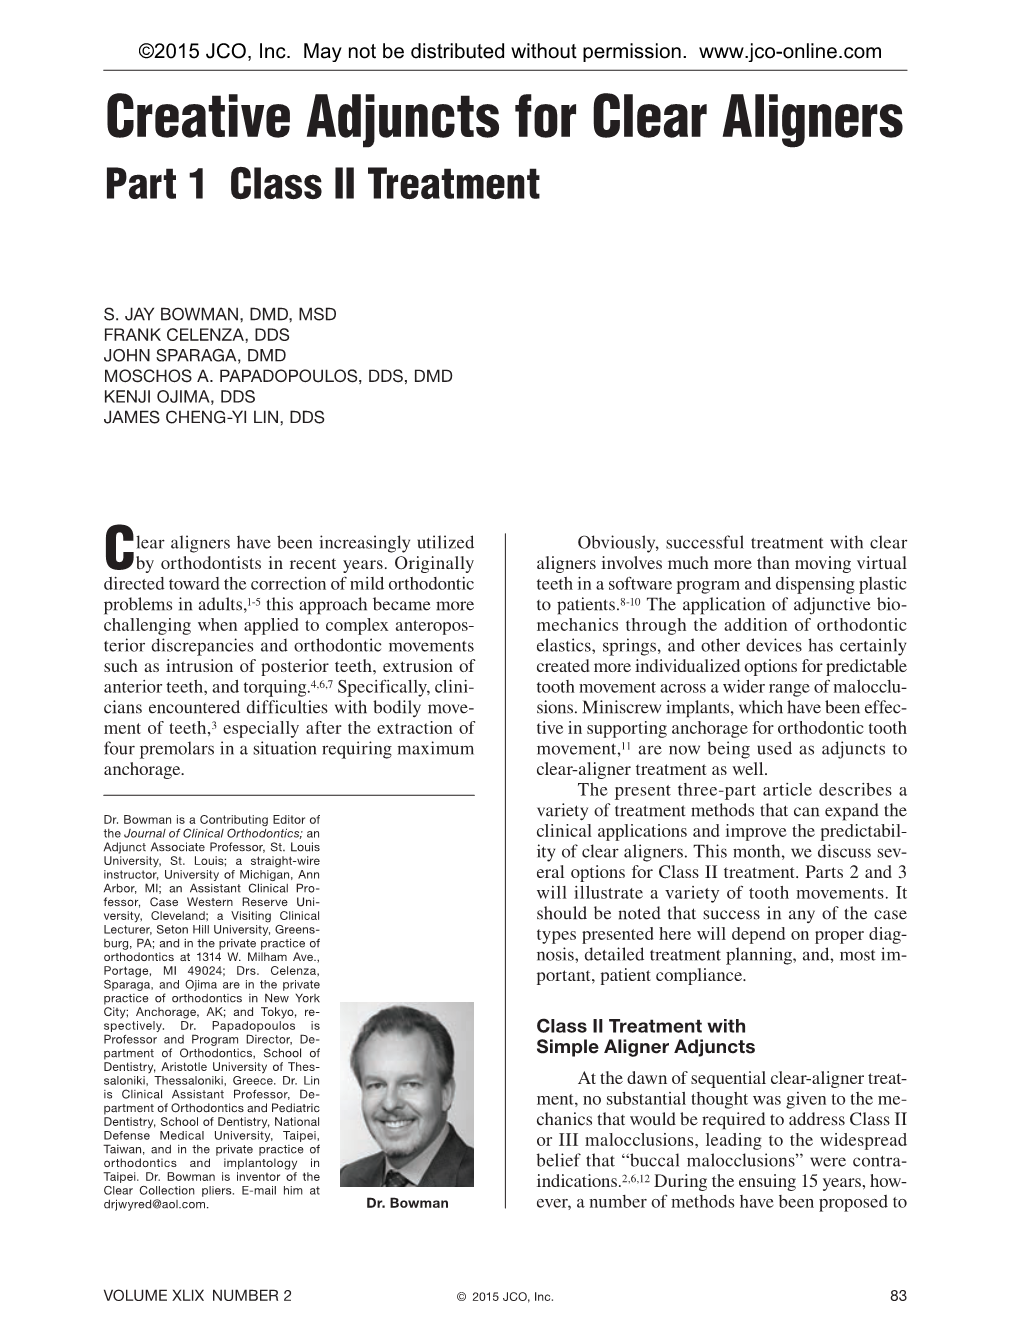 Creative Adjuncts for Clear Aligners Part 1 Class II Treatment